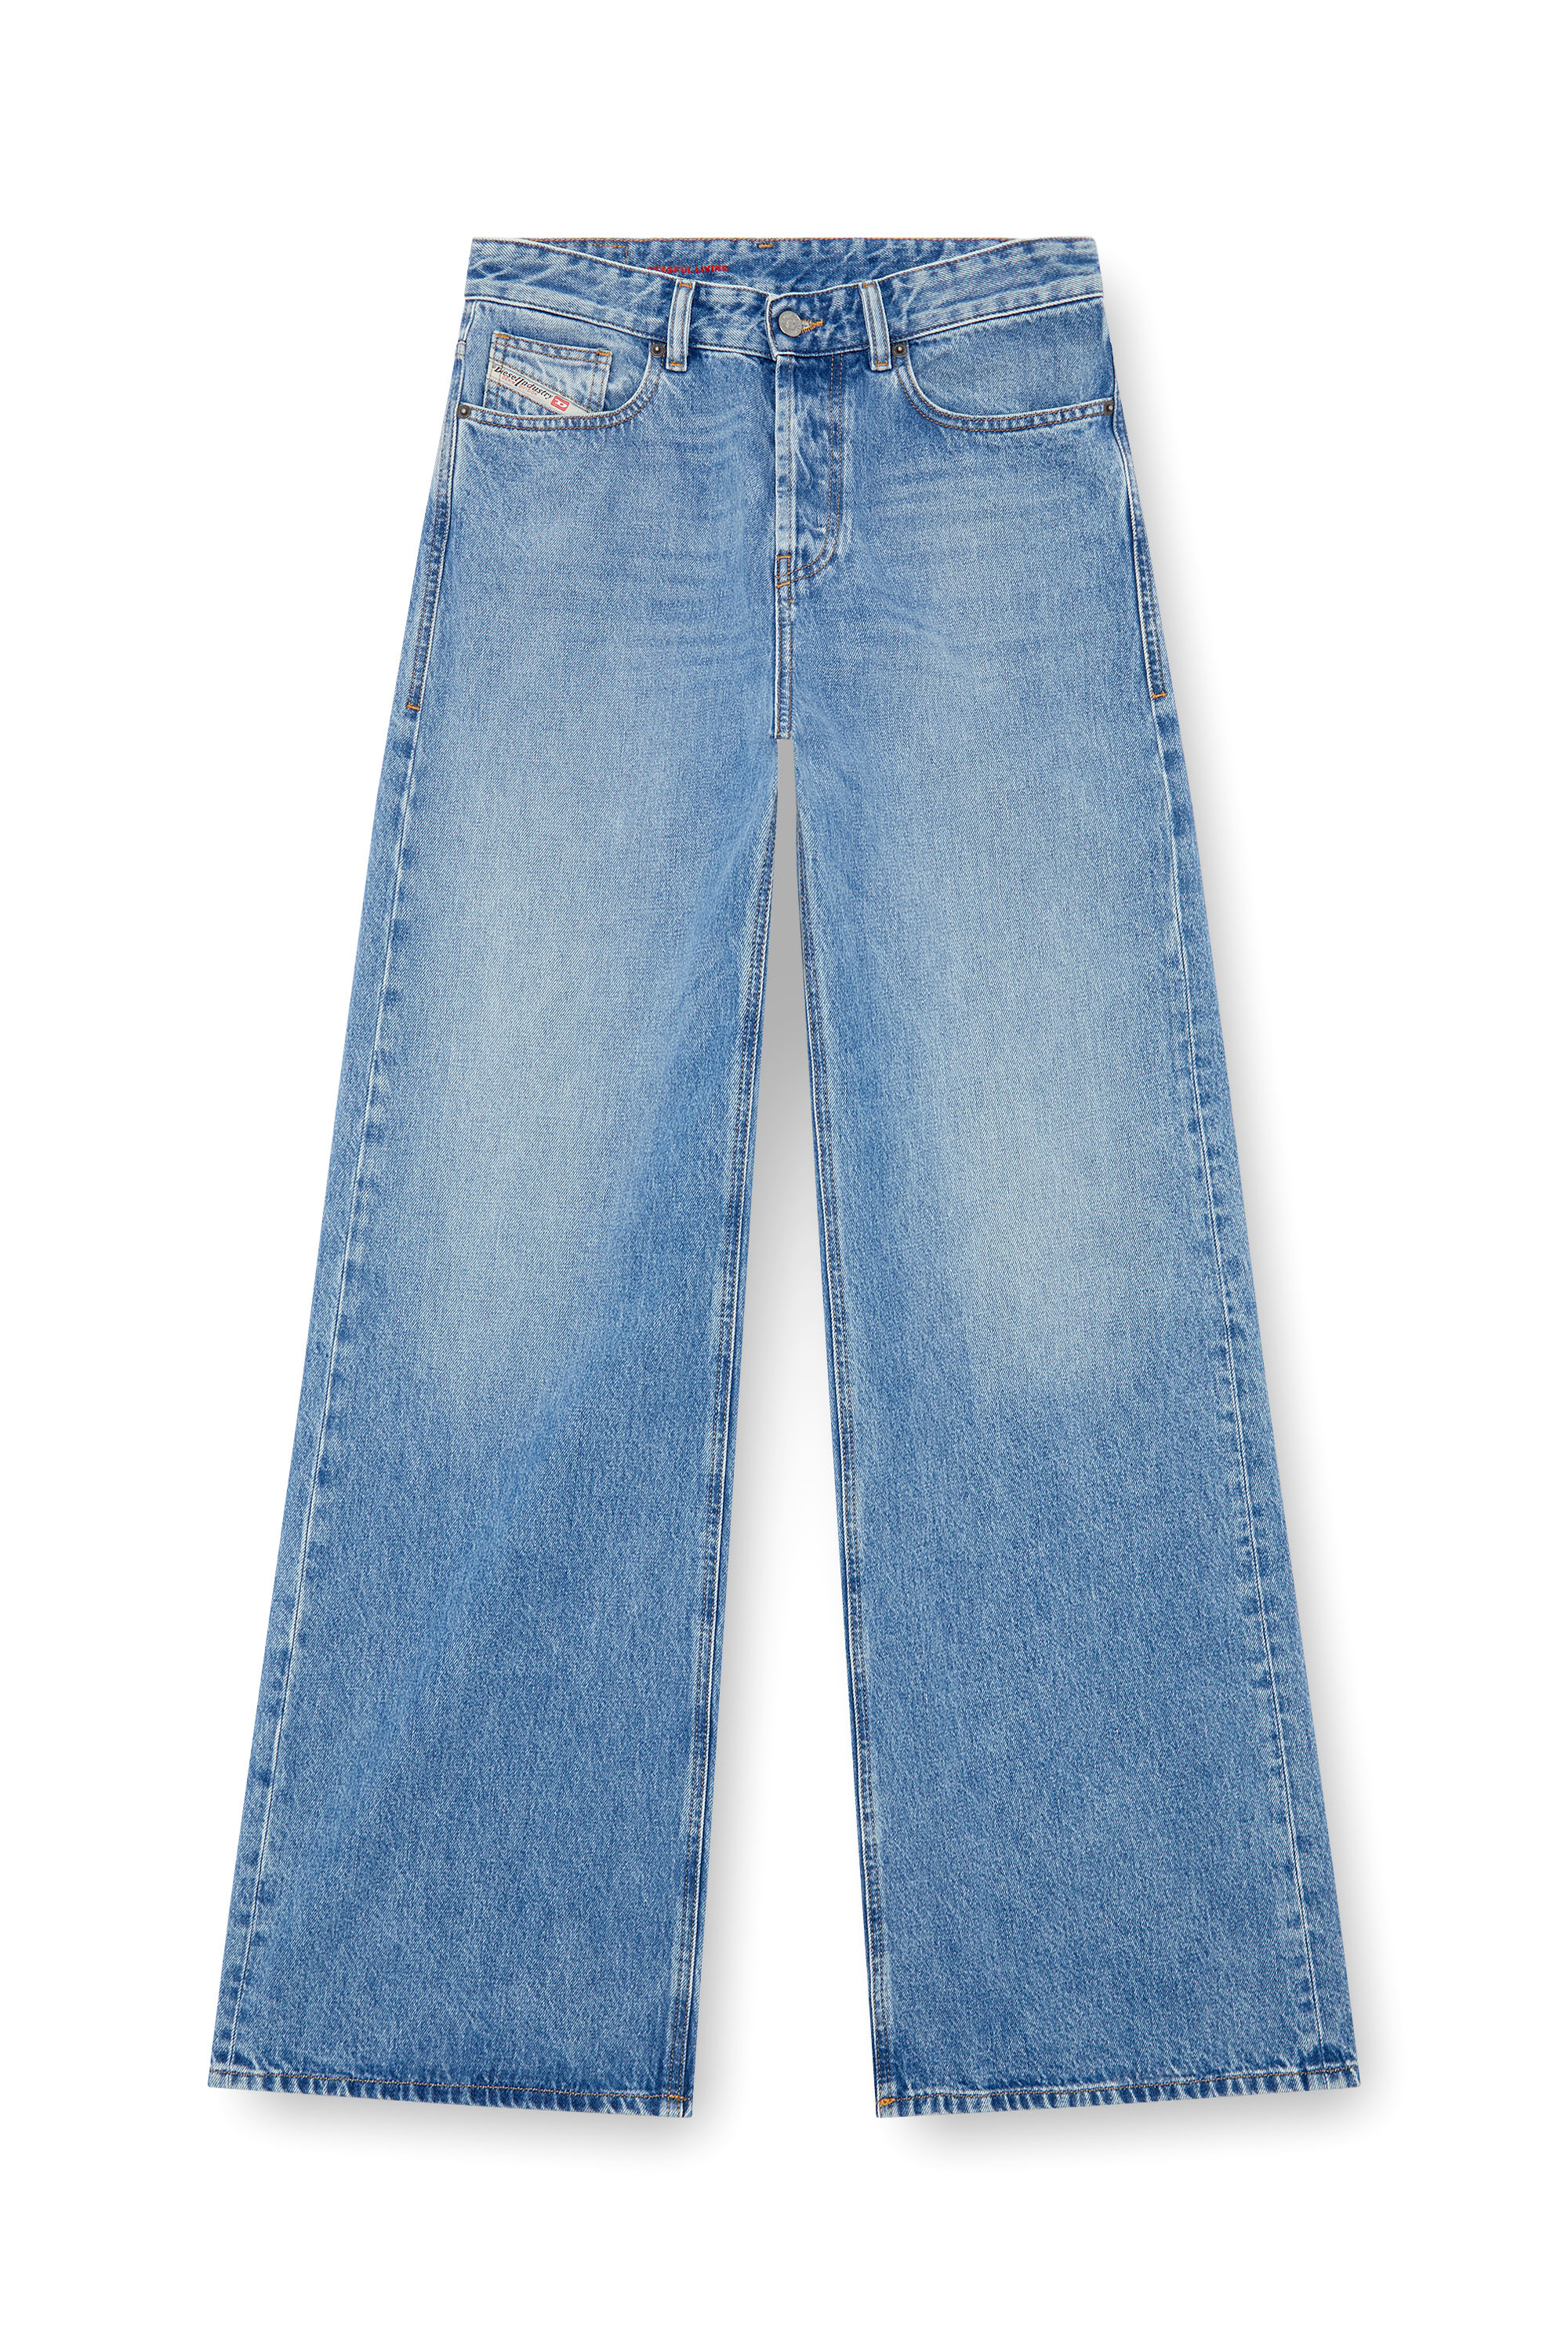 Diesel - Straight Jeans 1996 D-Sire 09I29, Mujer Straight Jeans - 1996 D-Sire in Azul marino - Image 3